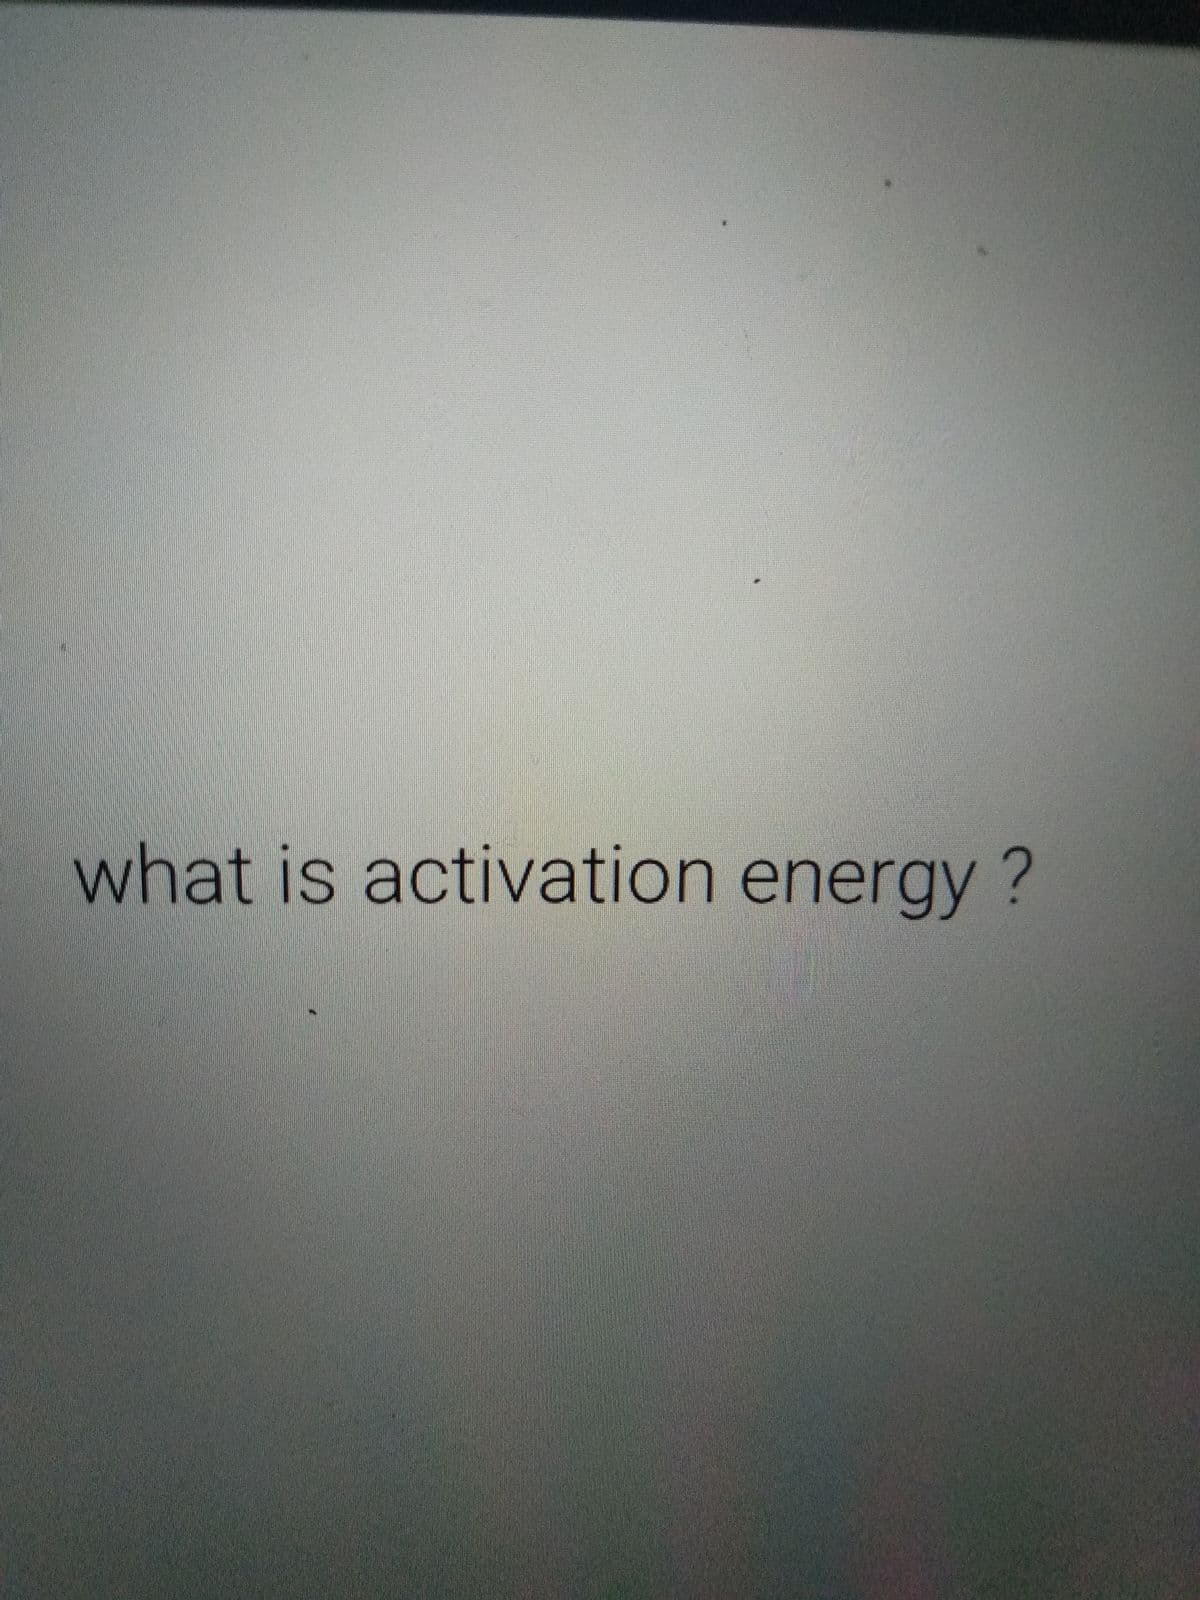 what is activation energy?
